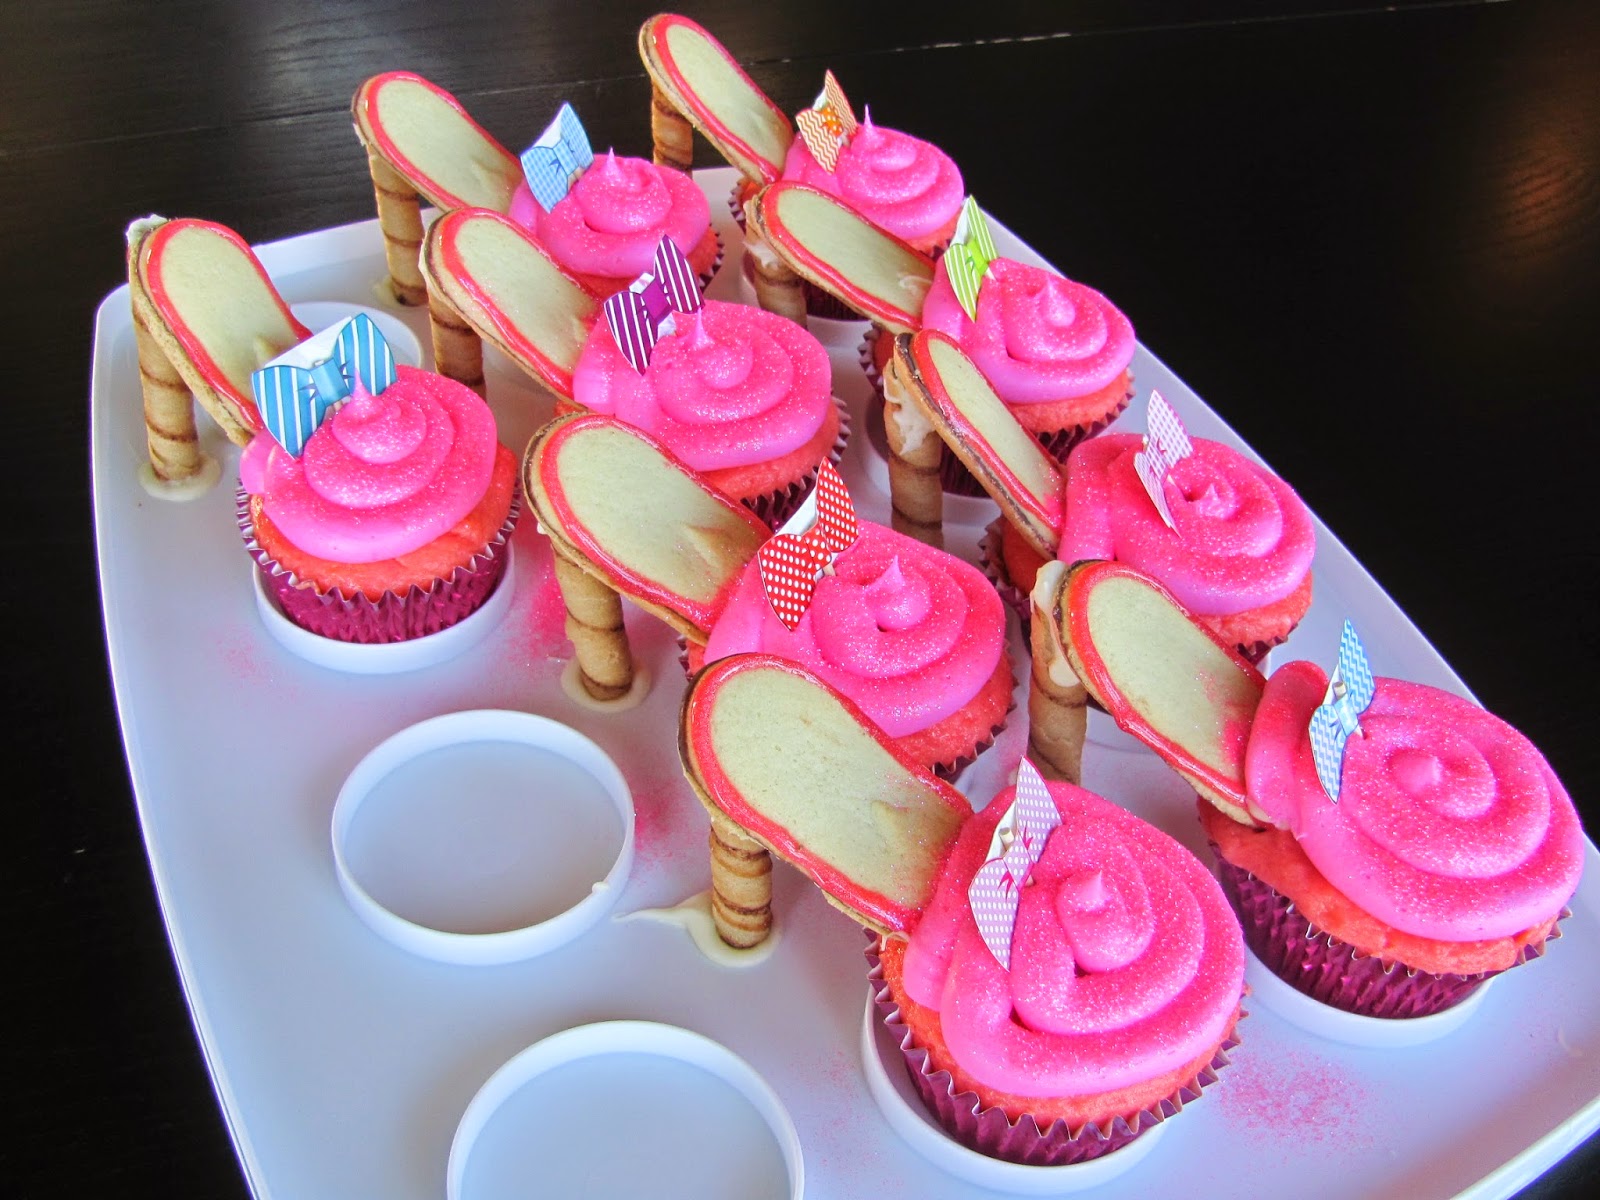 97 Limited Edition Cupcakes that look like high heel shoes for Women